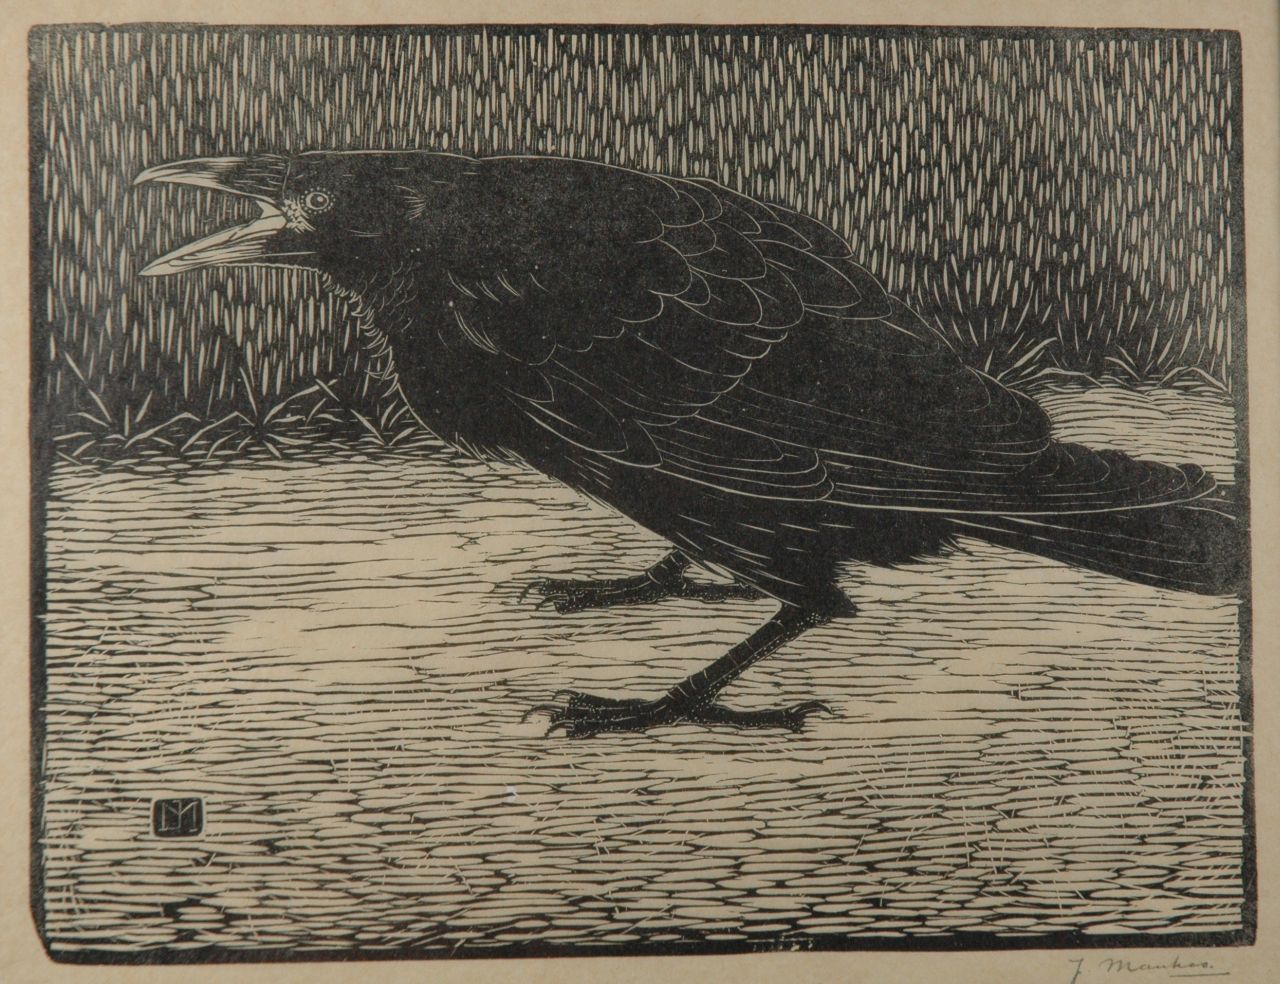 Mankes J.  | Jan Mankes, Screaming crow, woodcut on paper 18.3 x 23.8 cm, signed l.r. in full (in pencil) and with mon. in the bloc and executed in 1918